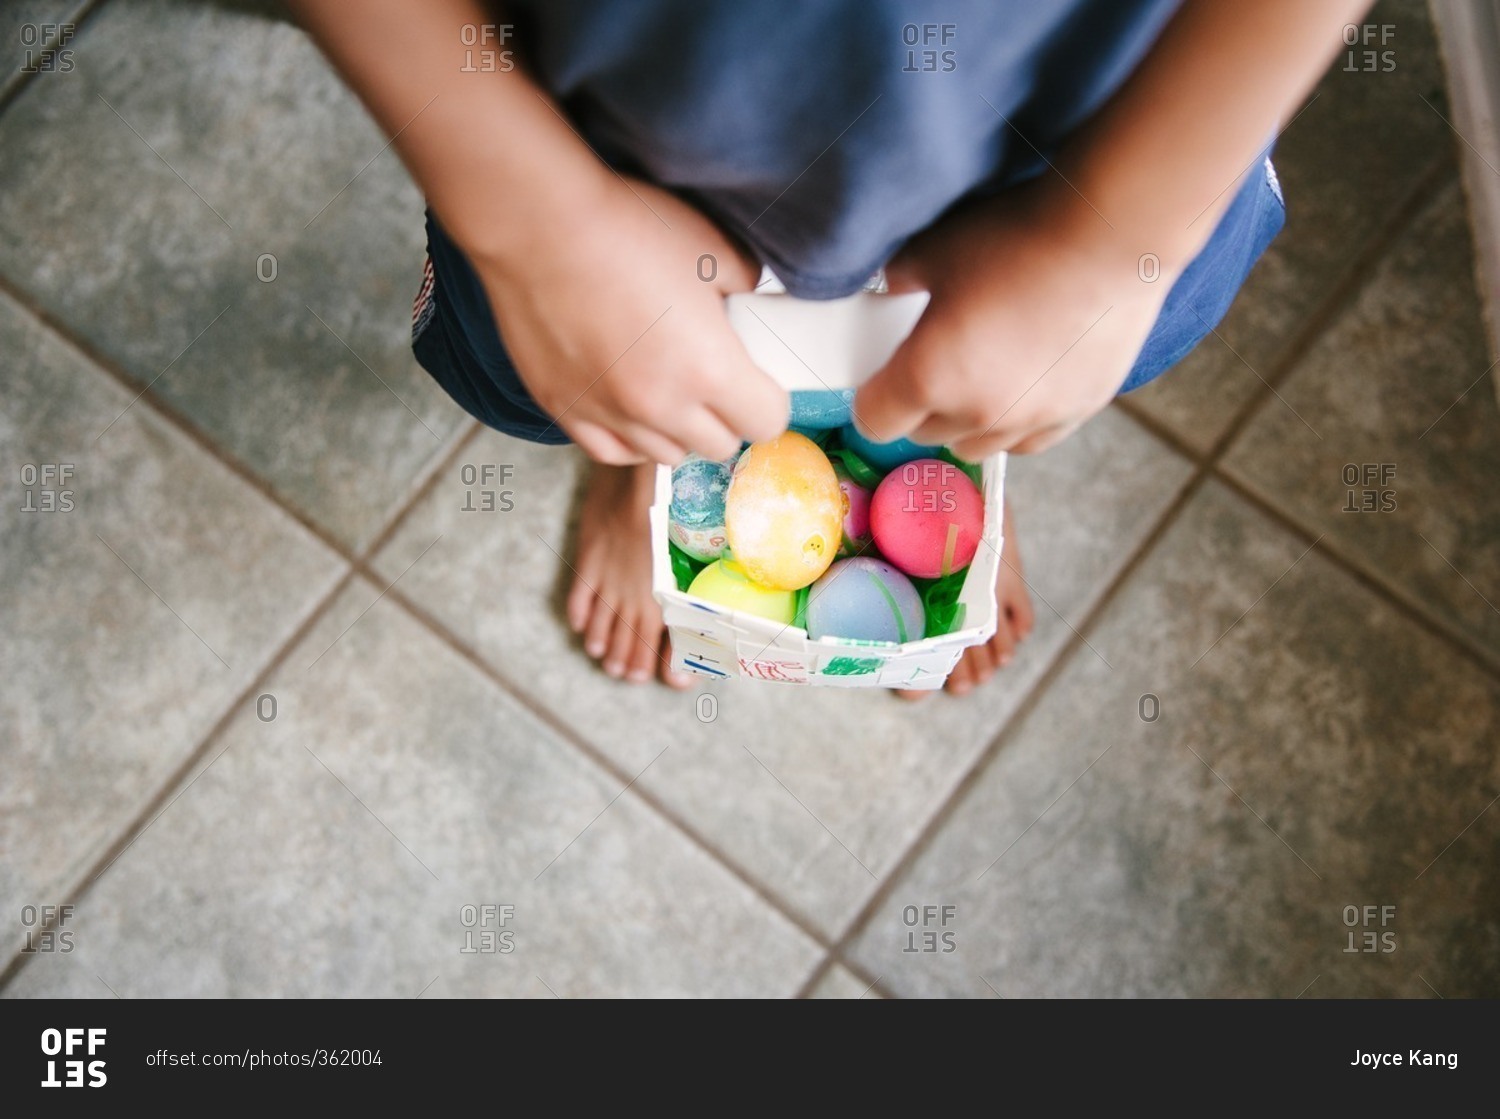 Overhead view of a child holding a basket of Easter eggs